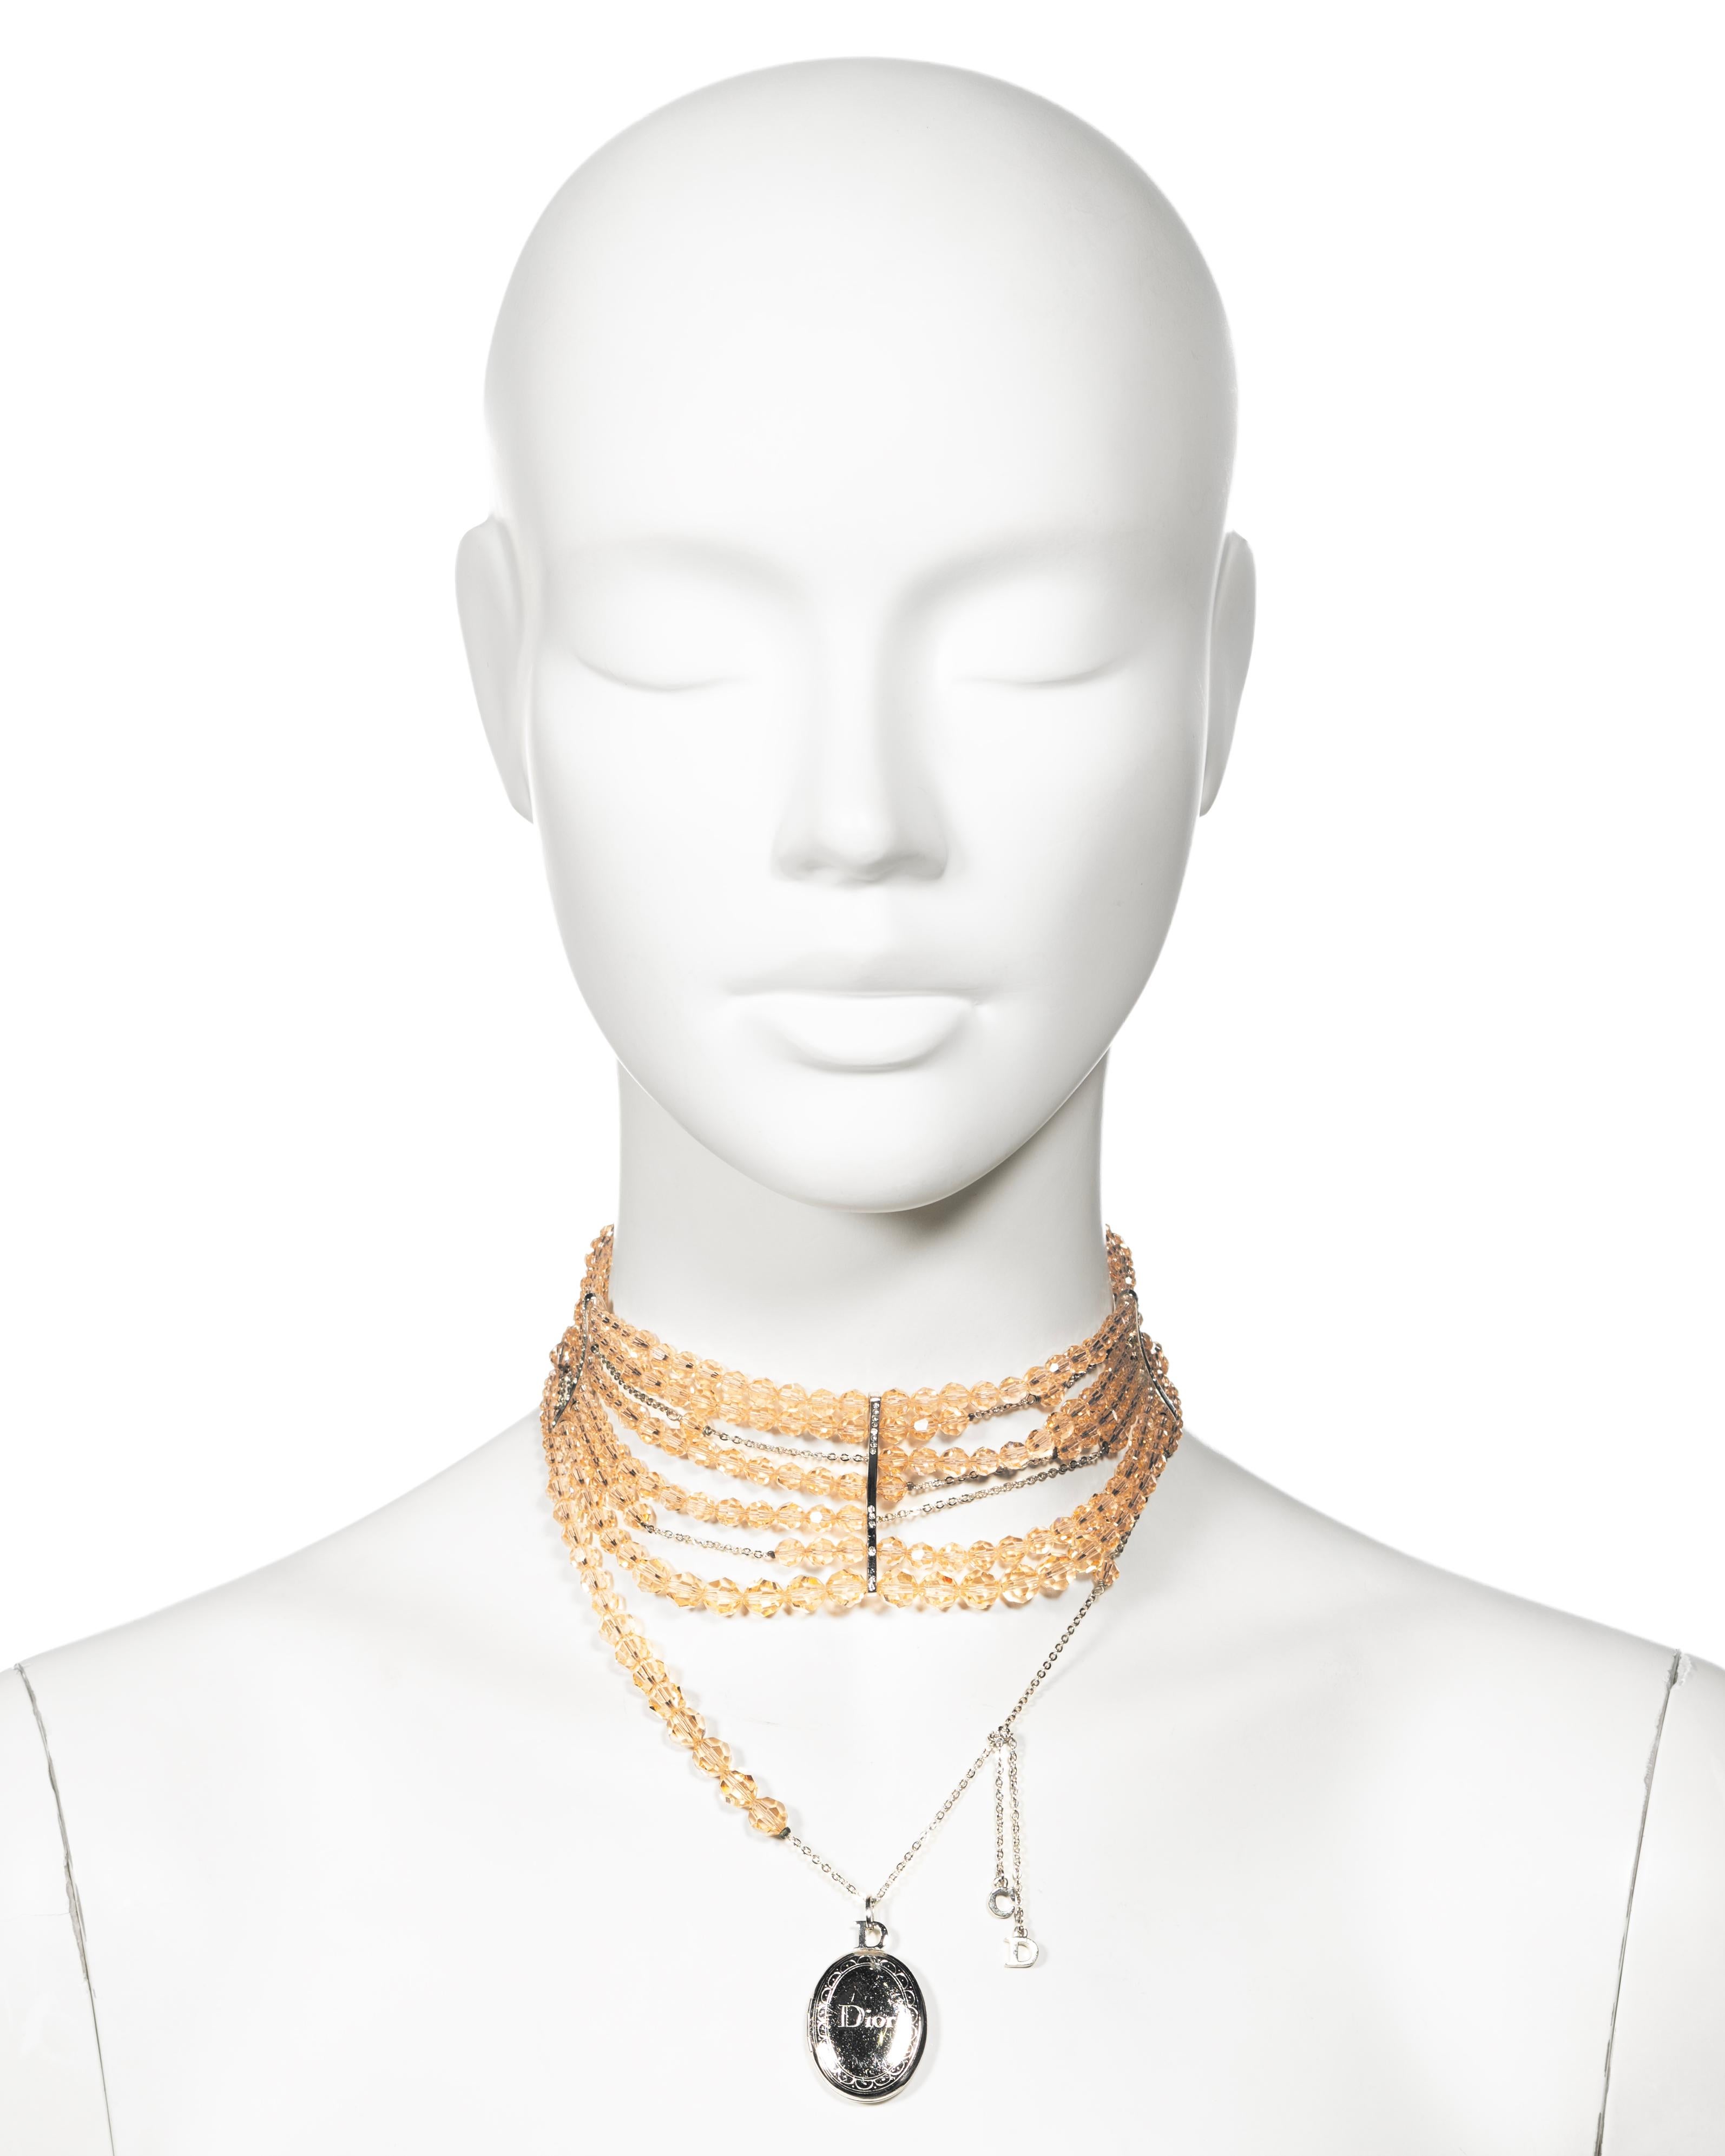 Women's Christian Dior by John Galliano Distressed Peach Bead Choker Necklace, c. 2004 For Sale